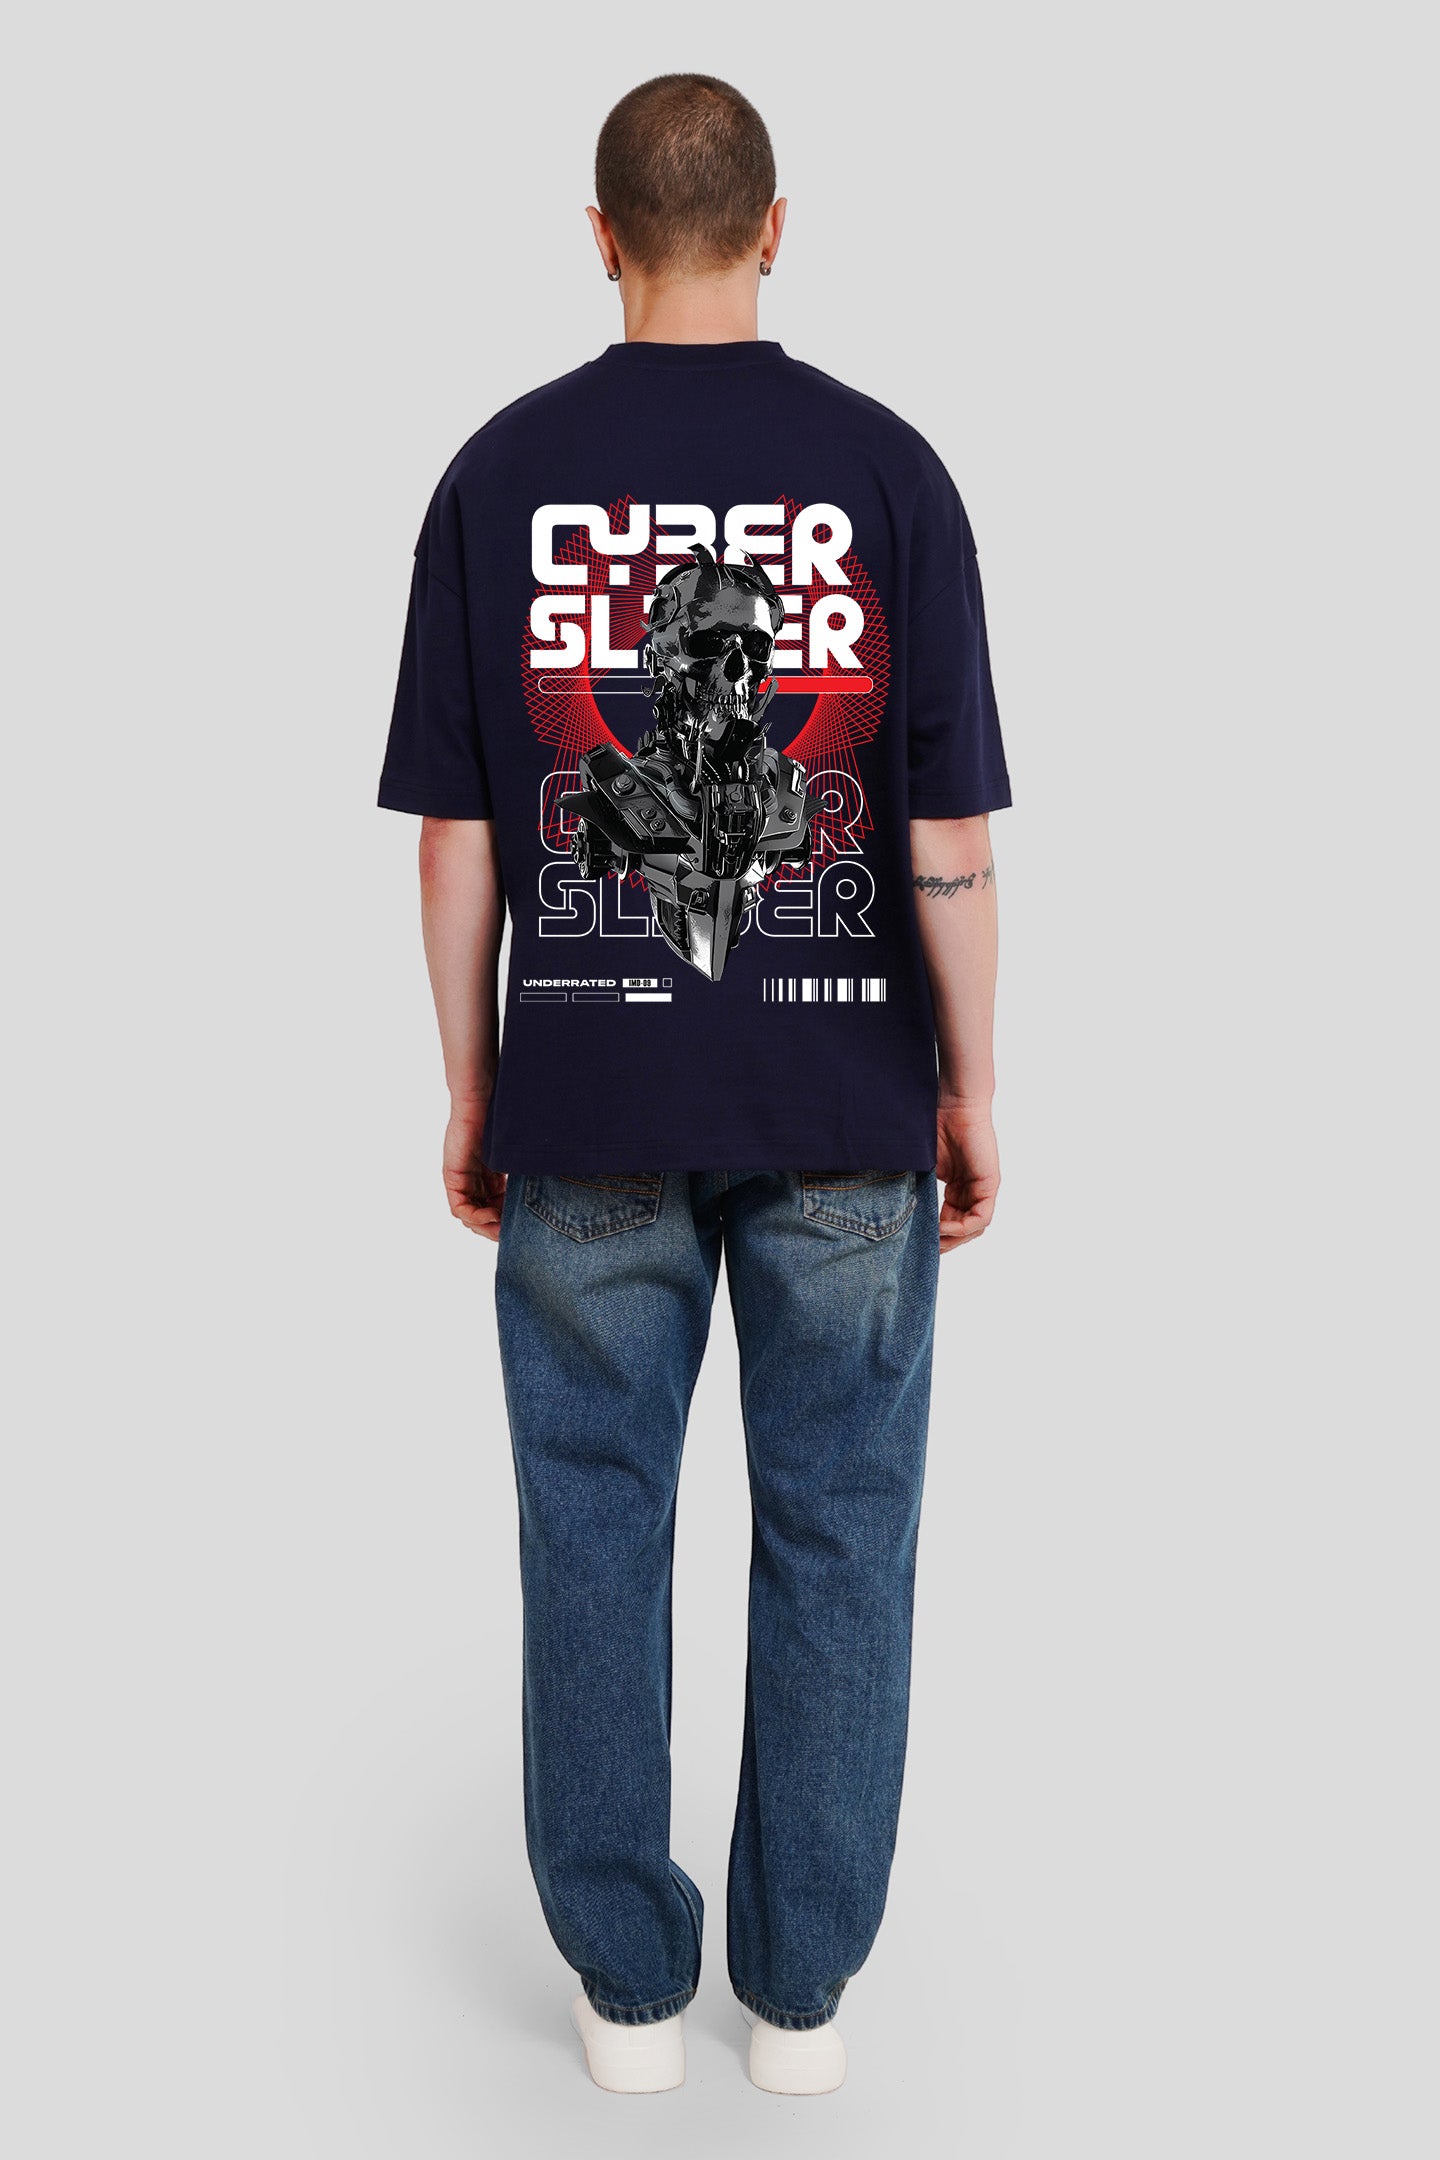 Cyber Slider Navy Blue Printed T Shirt Men Baggy Fit With Front And Back Design Pic 5